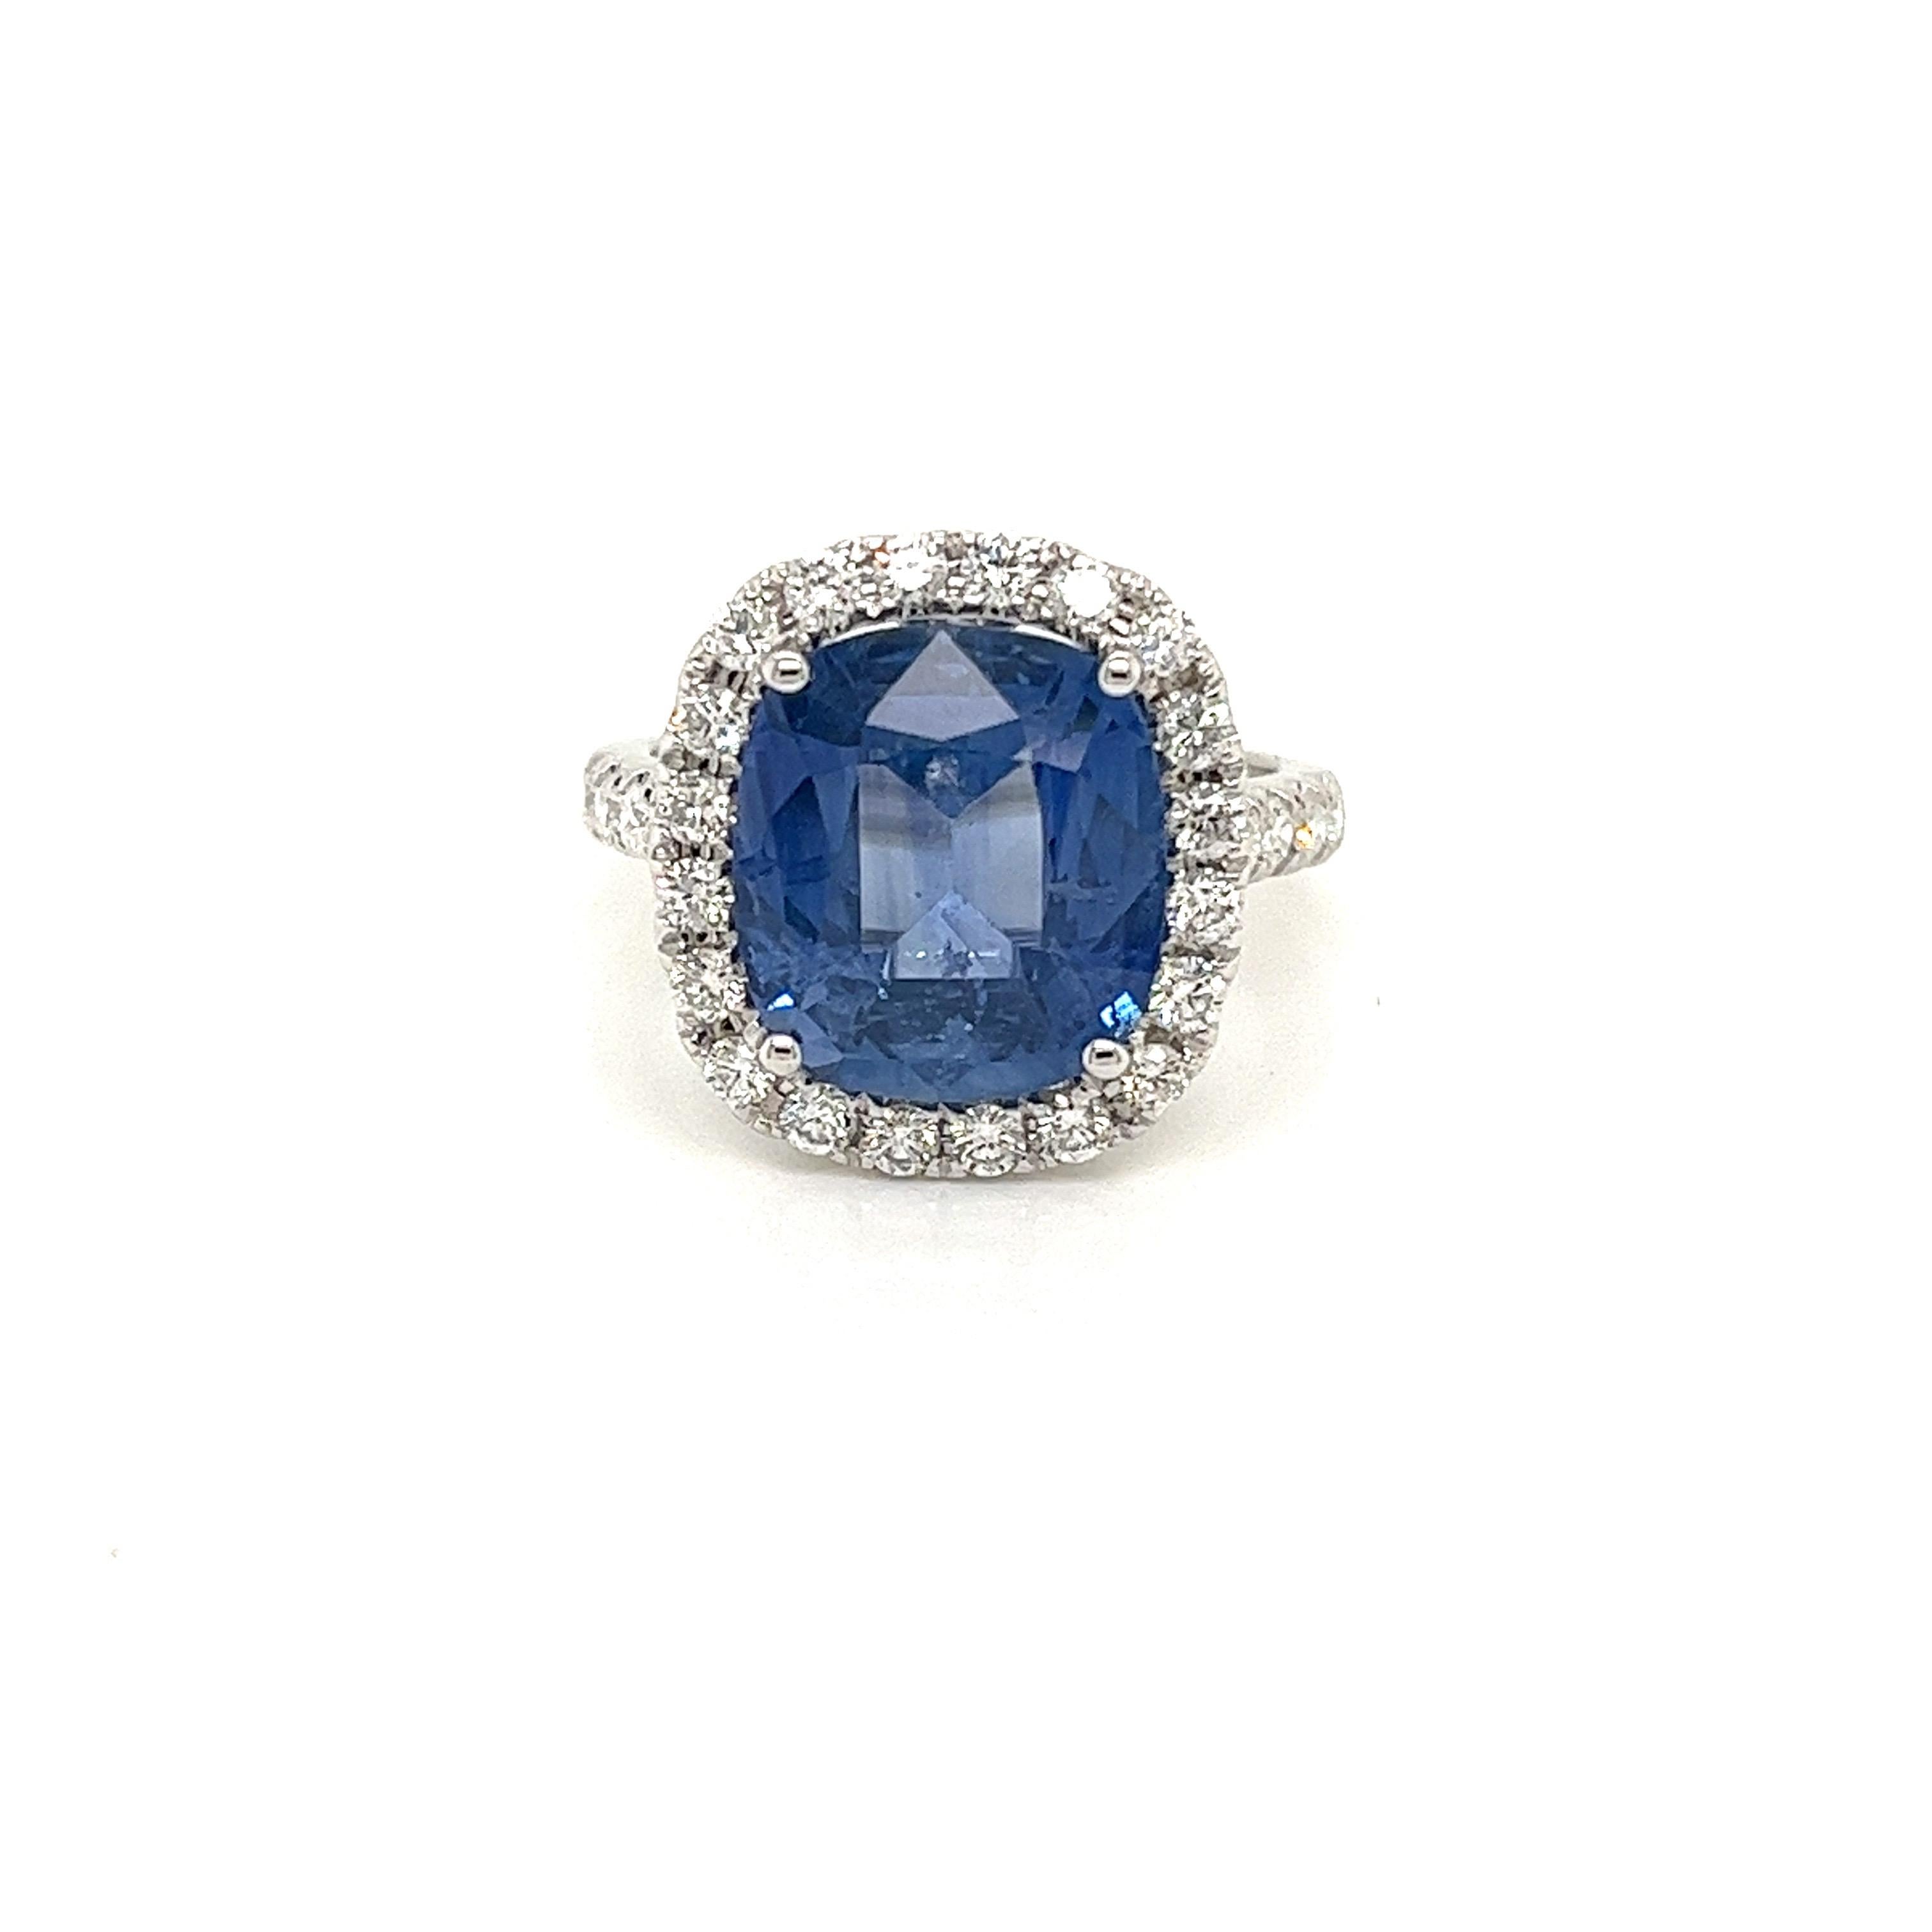 Certified Cushion Ceylon Sapphire weighing 5.89 carats
Measuring (11.67x10.61x5.61) mm
Diamonds weighing .77 carats
GH-SI1
Set in 18k white gold ring
4.56 g